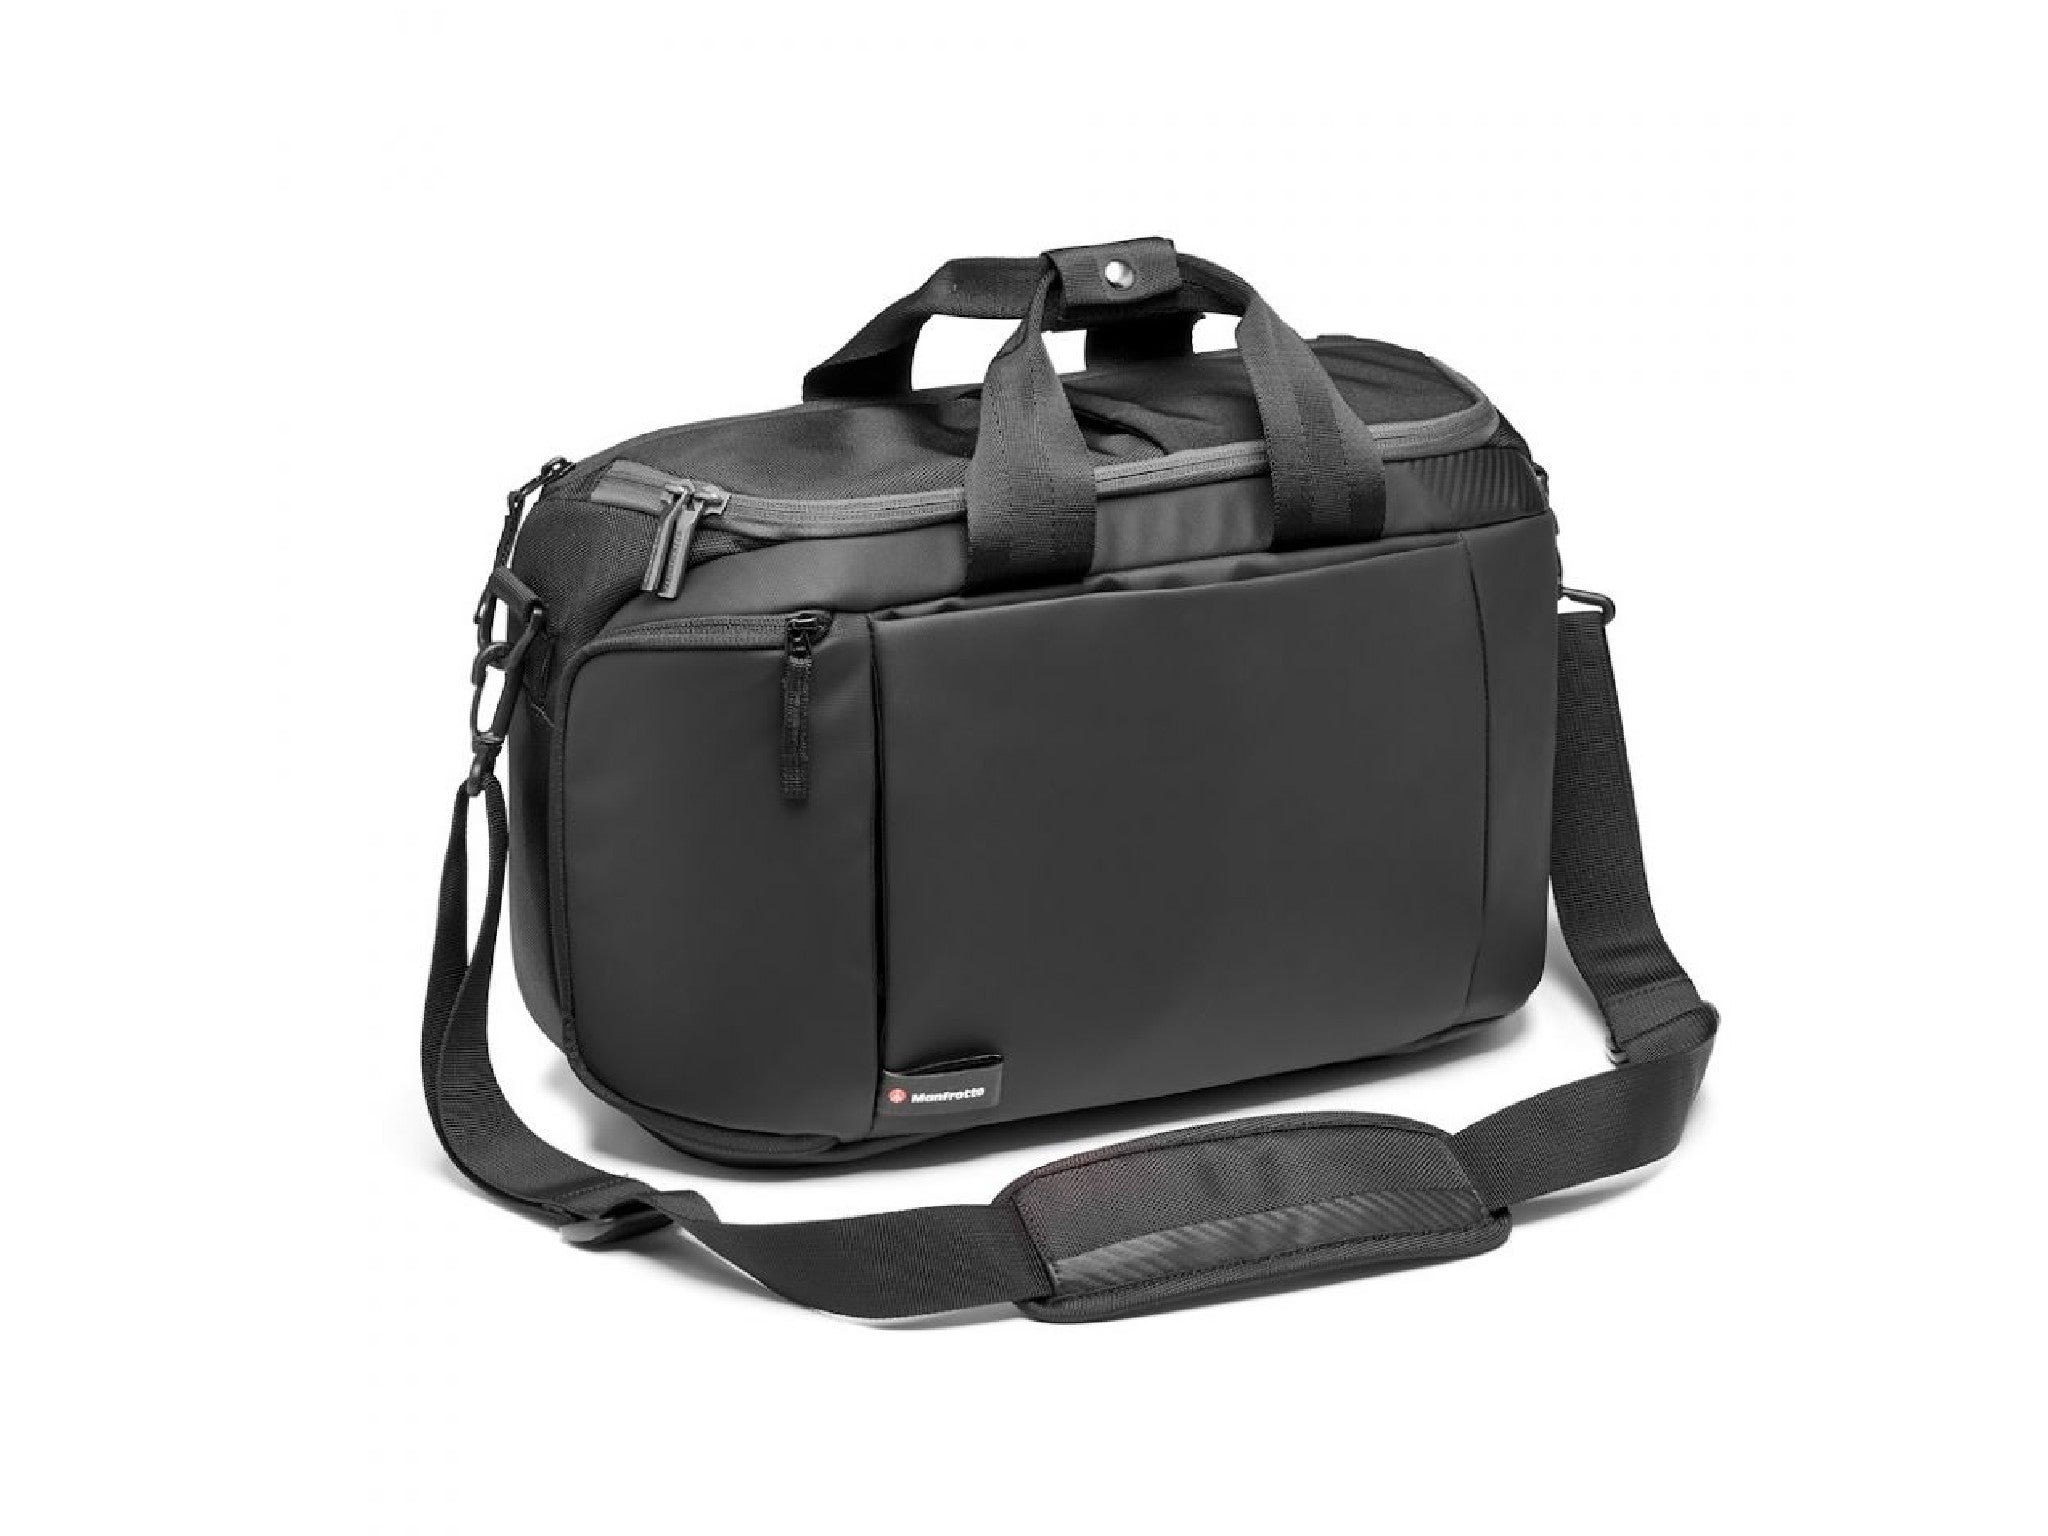 Manfrotto advanced hybrid backpack for DLSRs